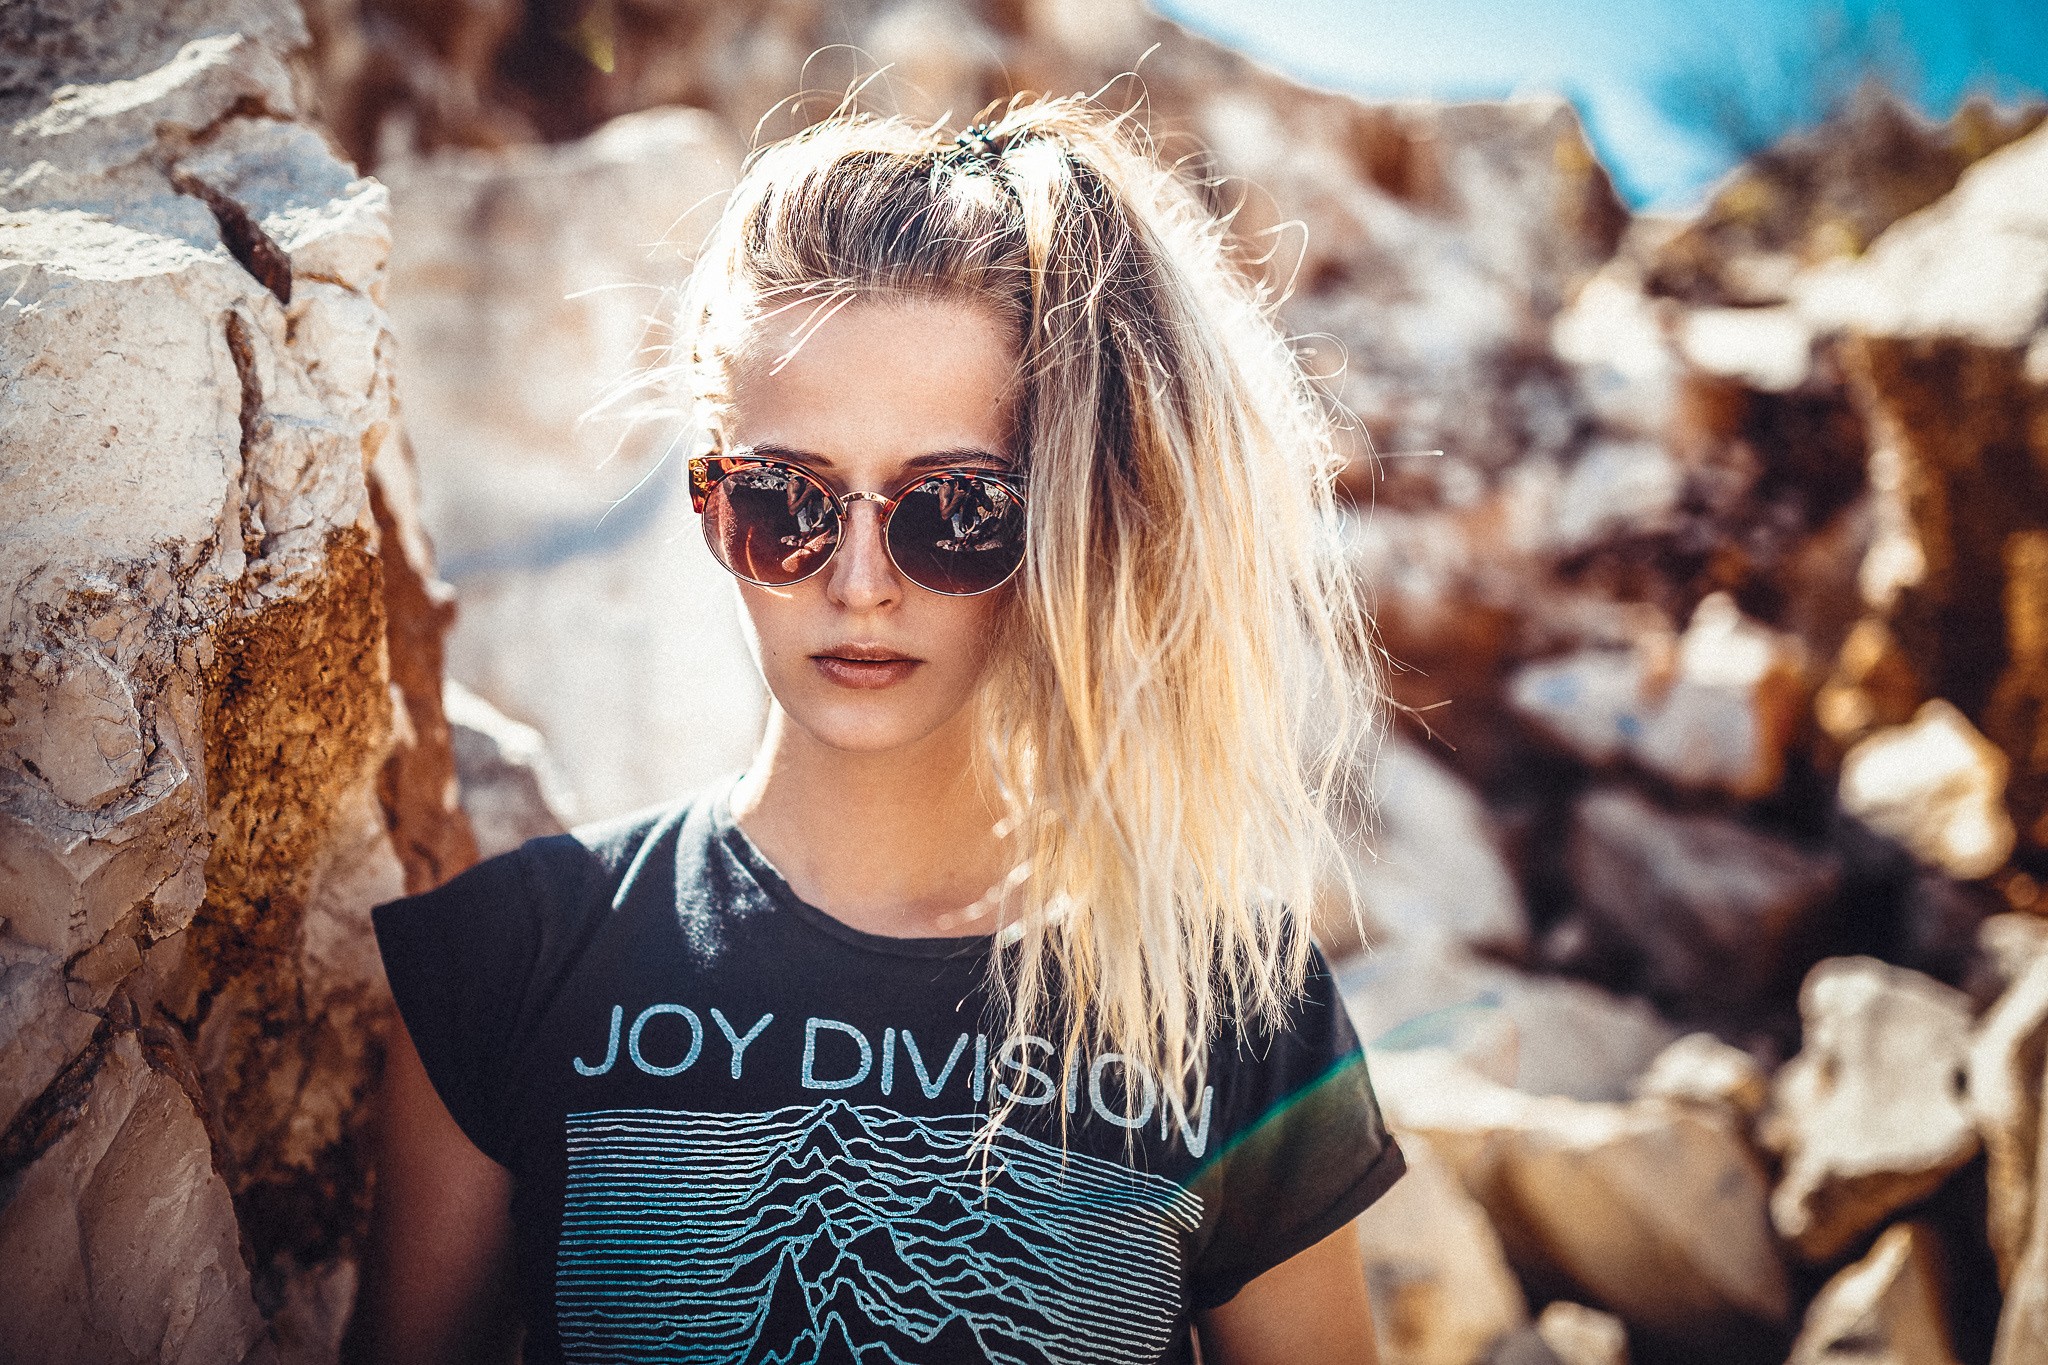 People 2048x1365 women Joy Division Lennart Bader Malou Chloé T-shirt women with shades sunglasses long hair women outdoors outdoors red lipstick